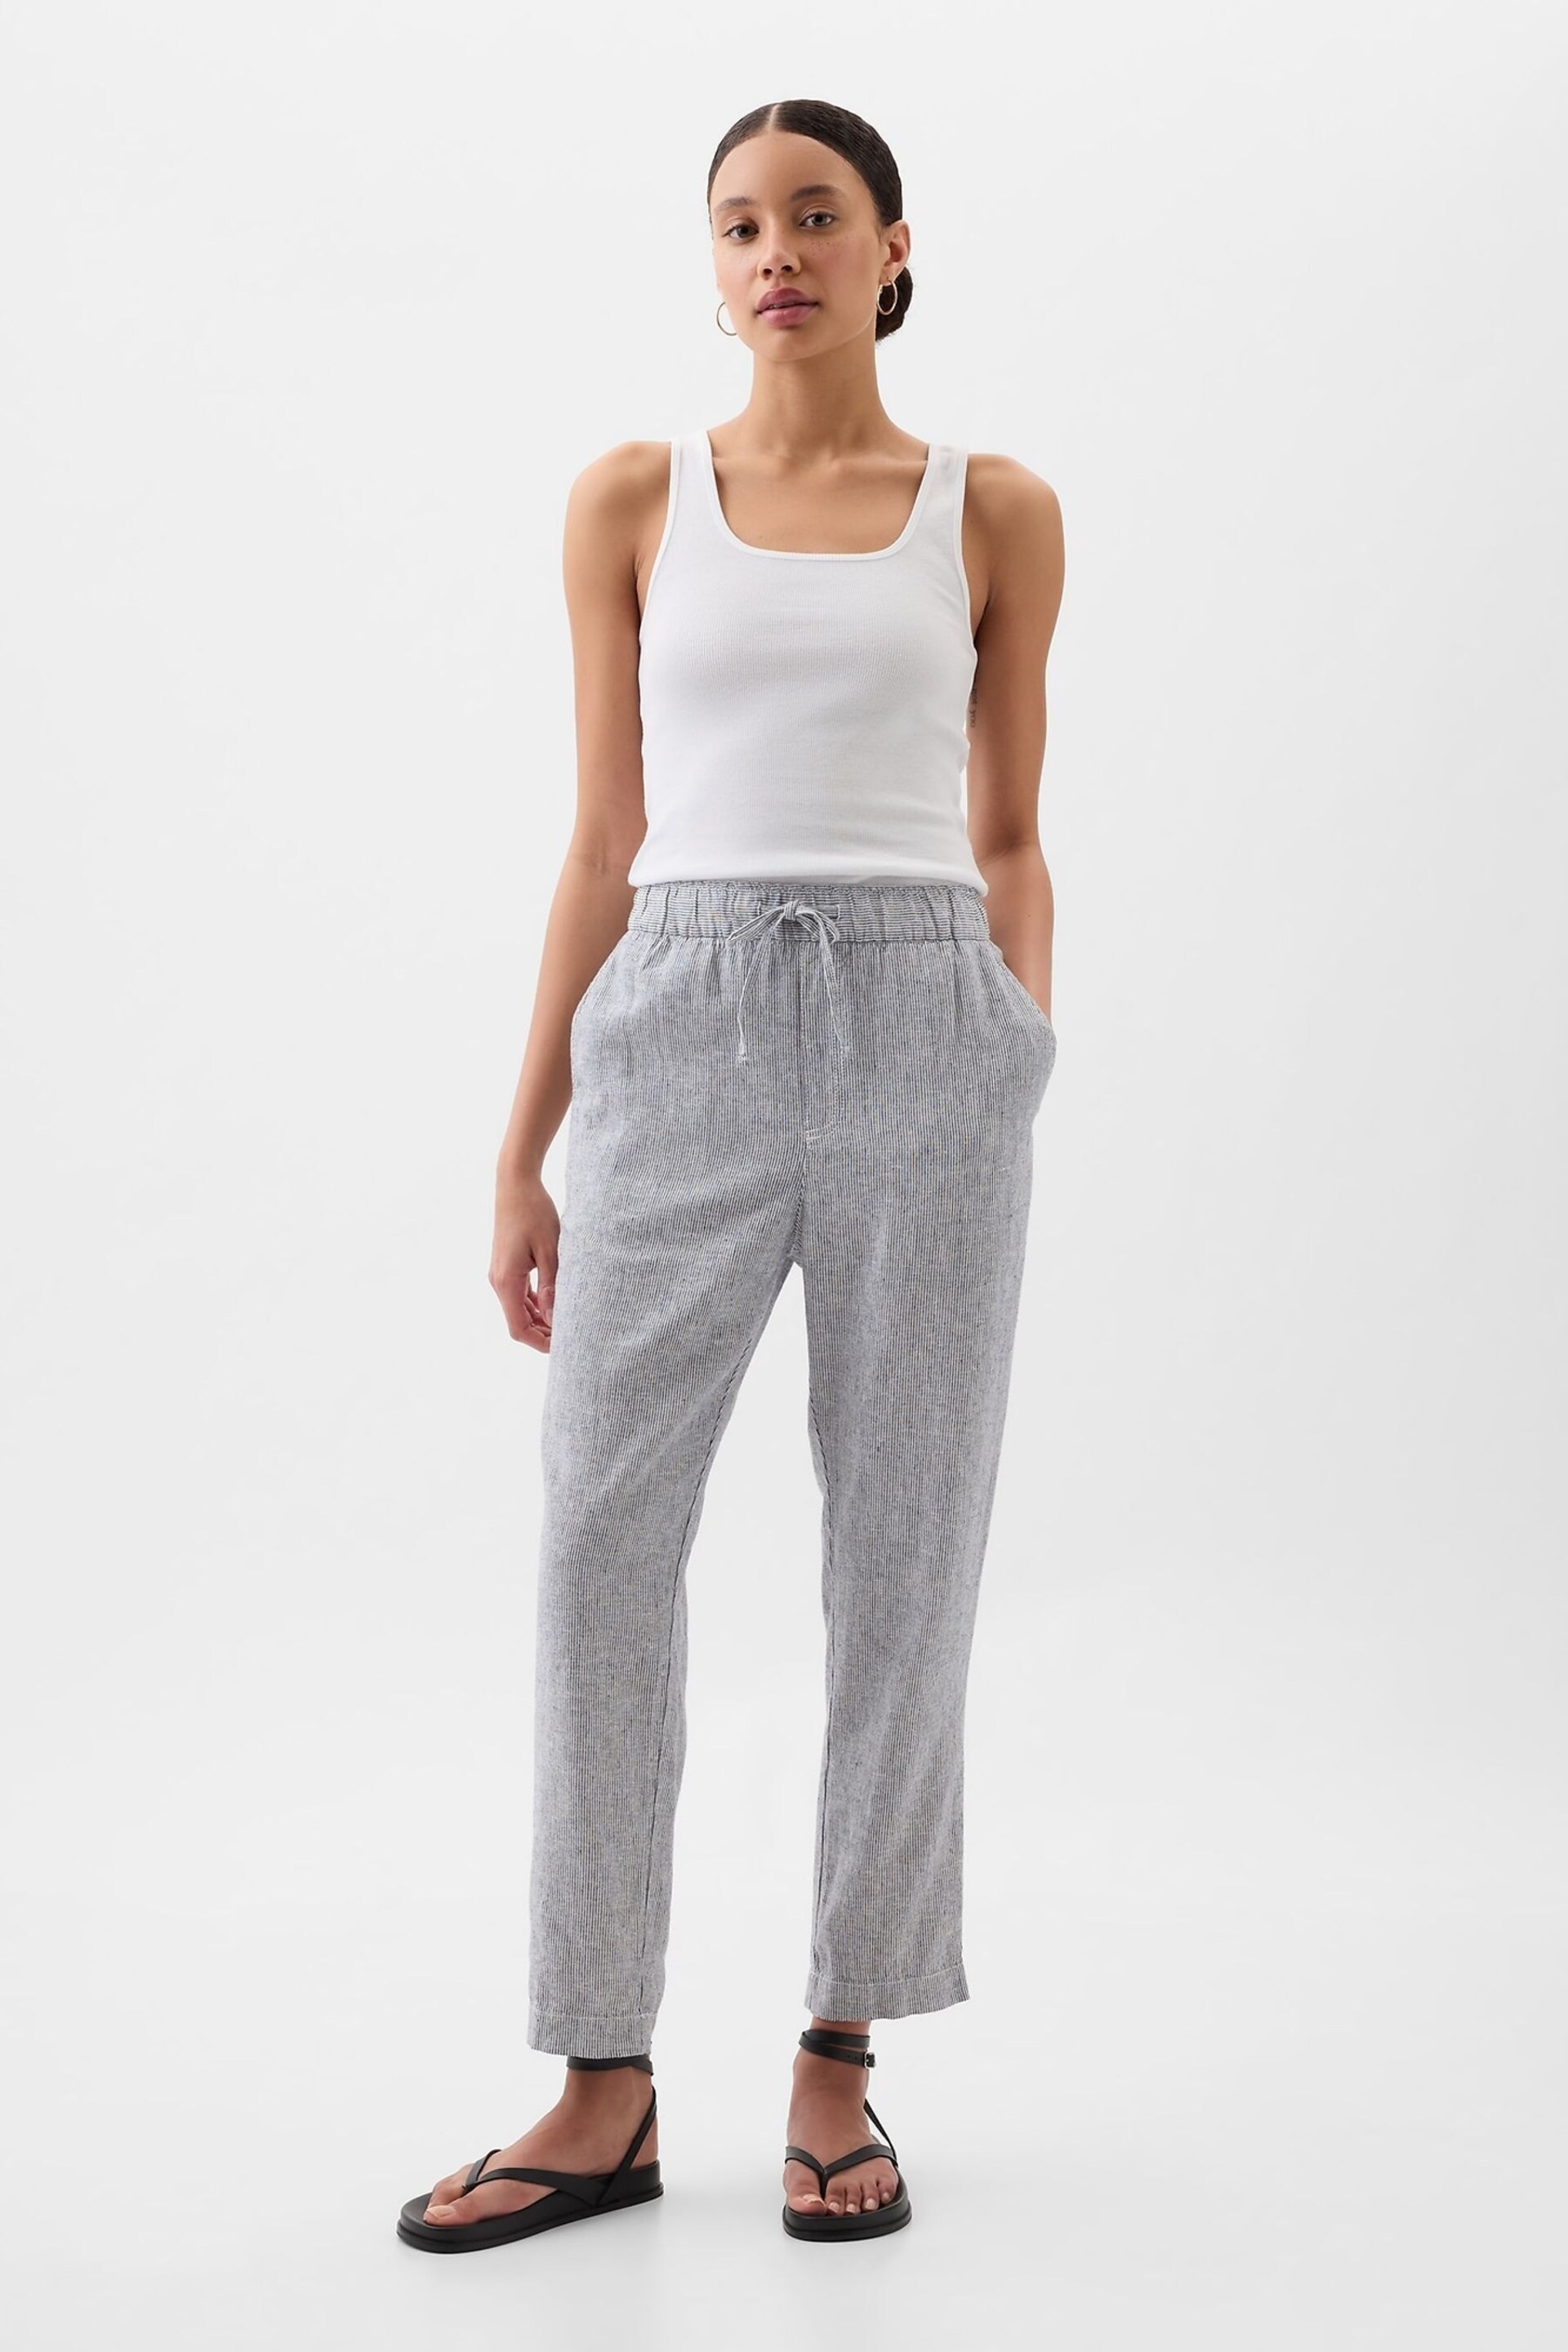 Gap Grey Linen Cotton Pull On Taper Trousers - Image 1 of 2